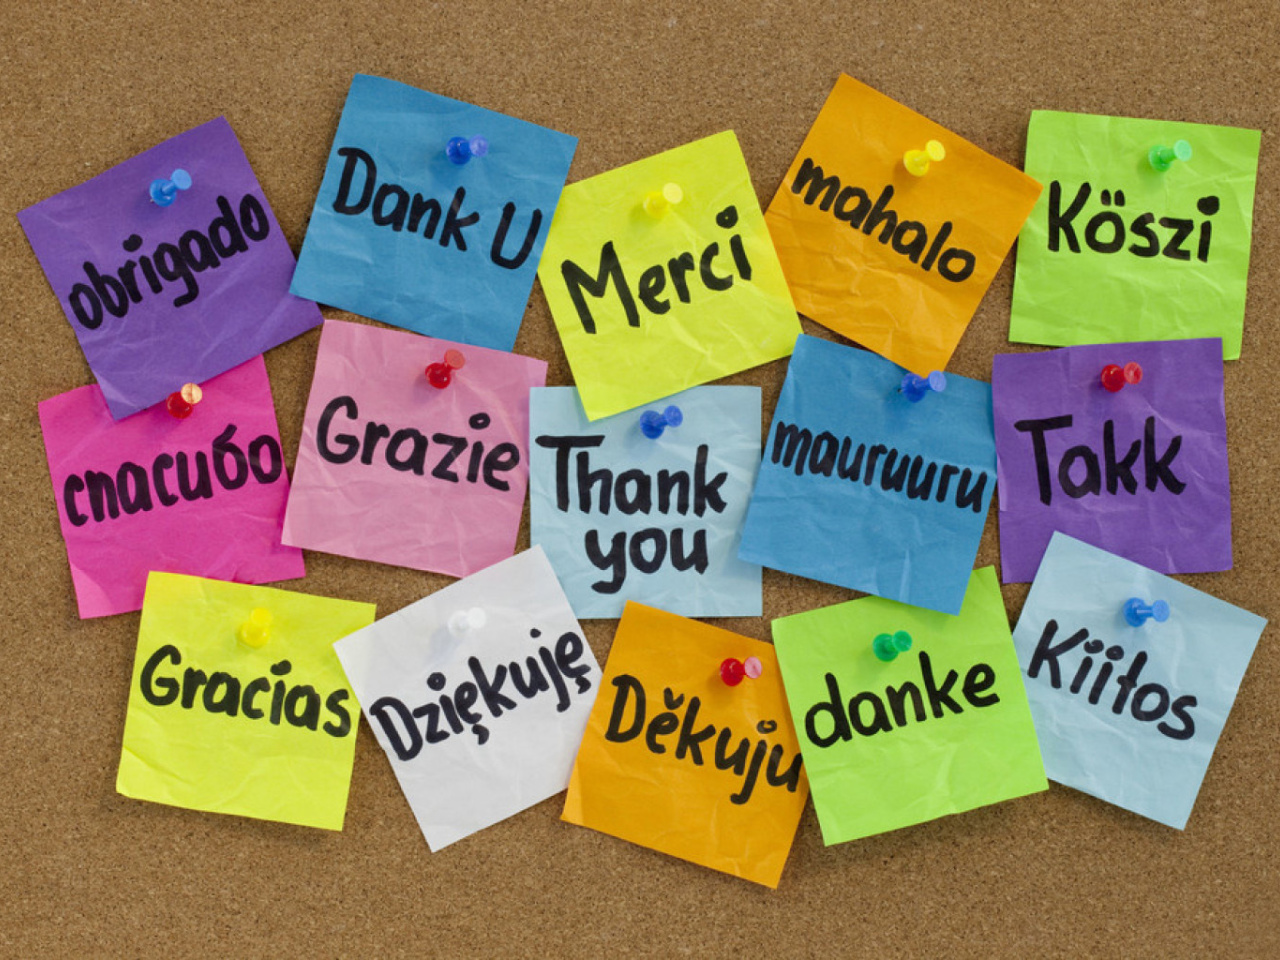 How To Say Thank You in Different Languages screenshot #1 1280x960